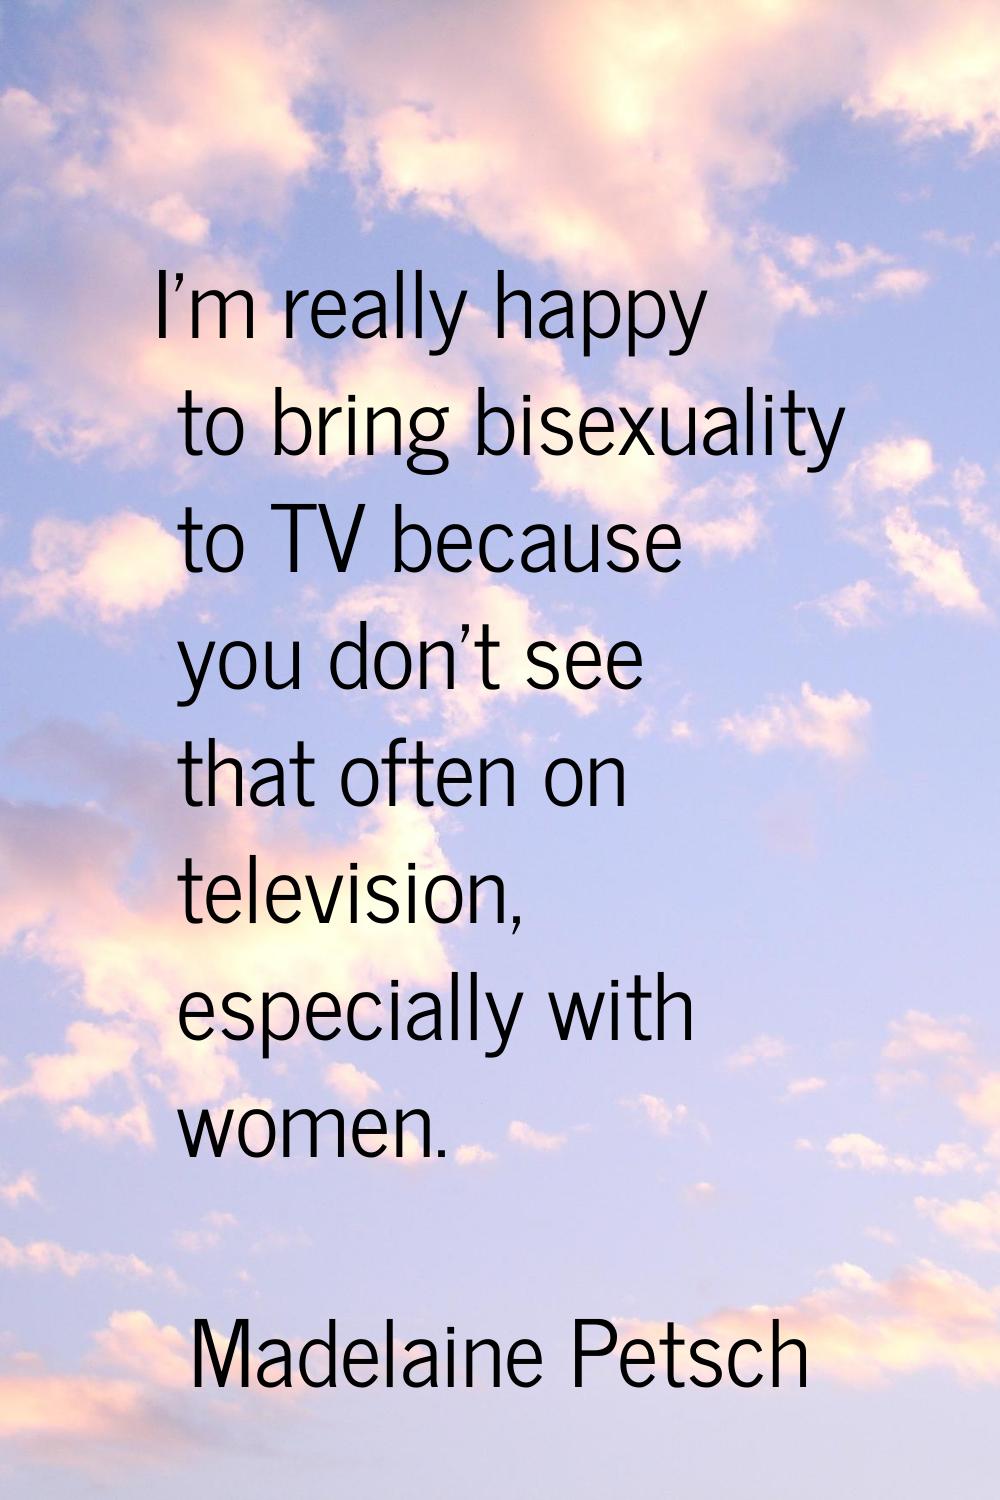 I'm really happy to bring bisexuality to TV because you don't see that often on television, especia